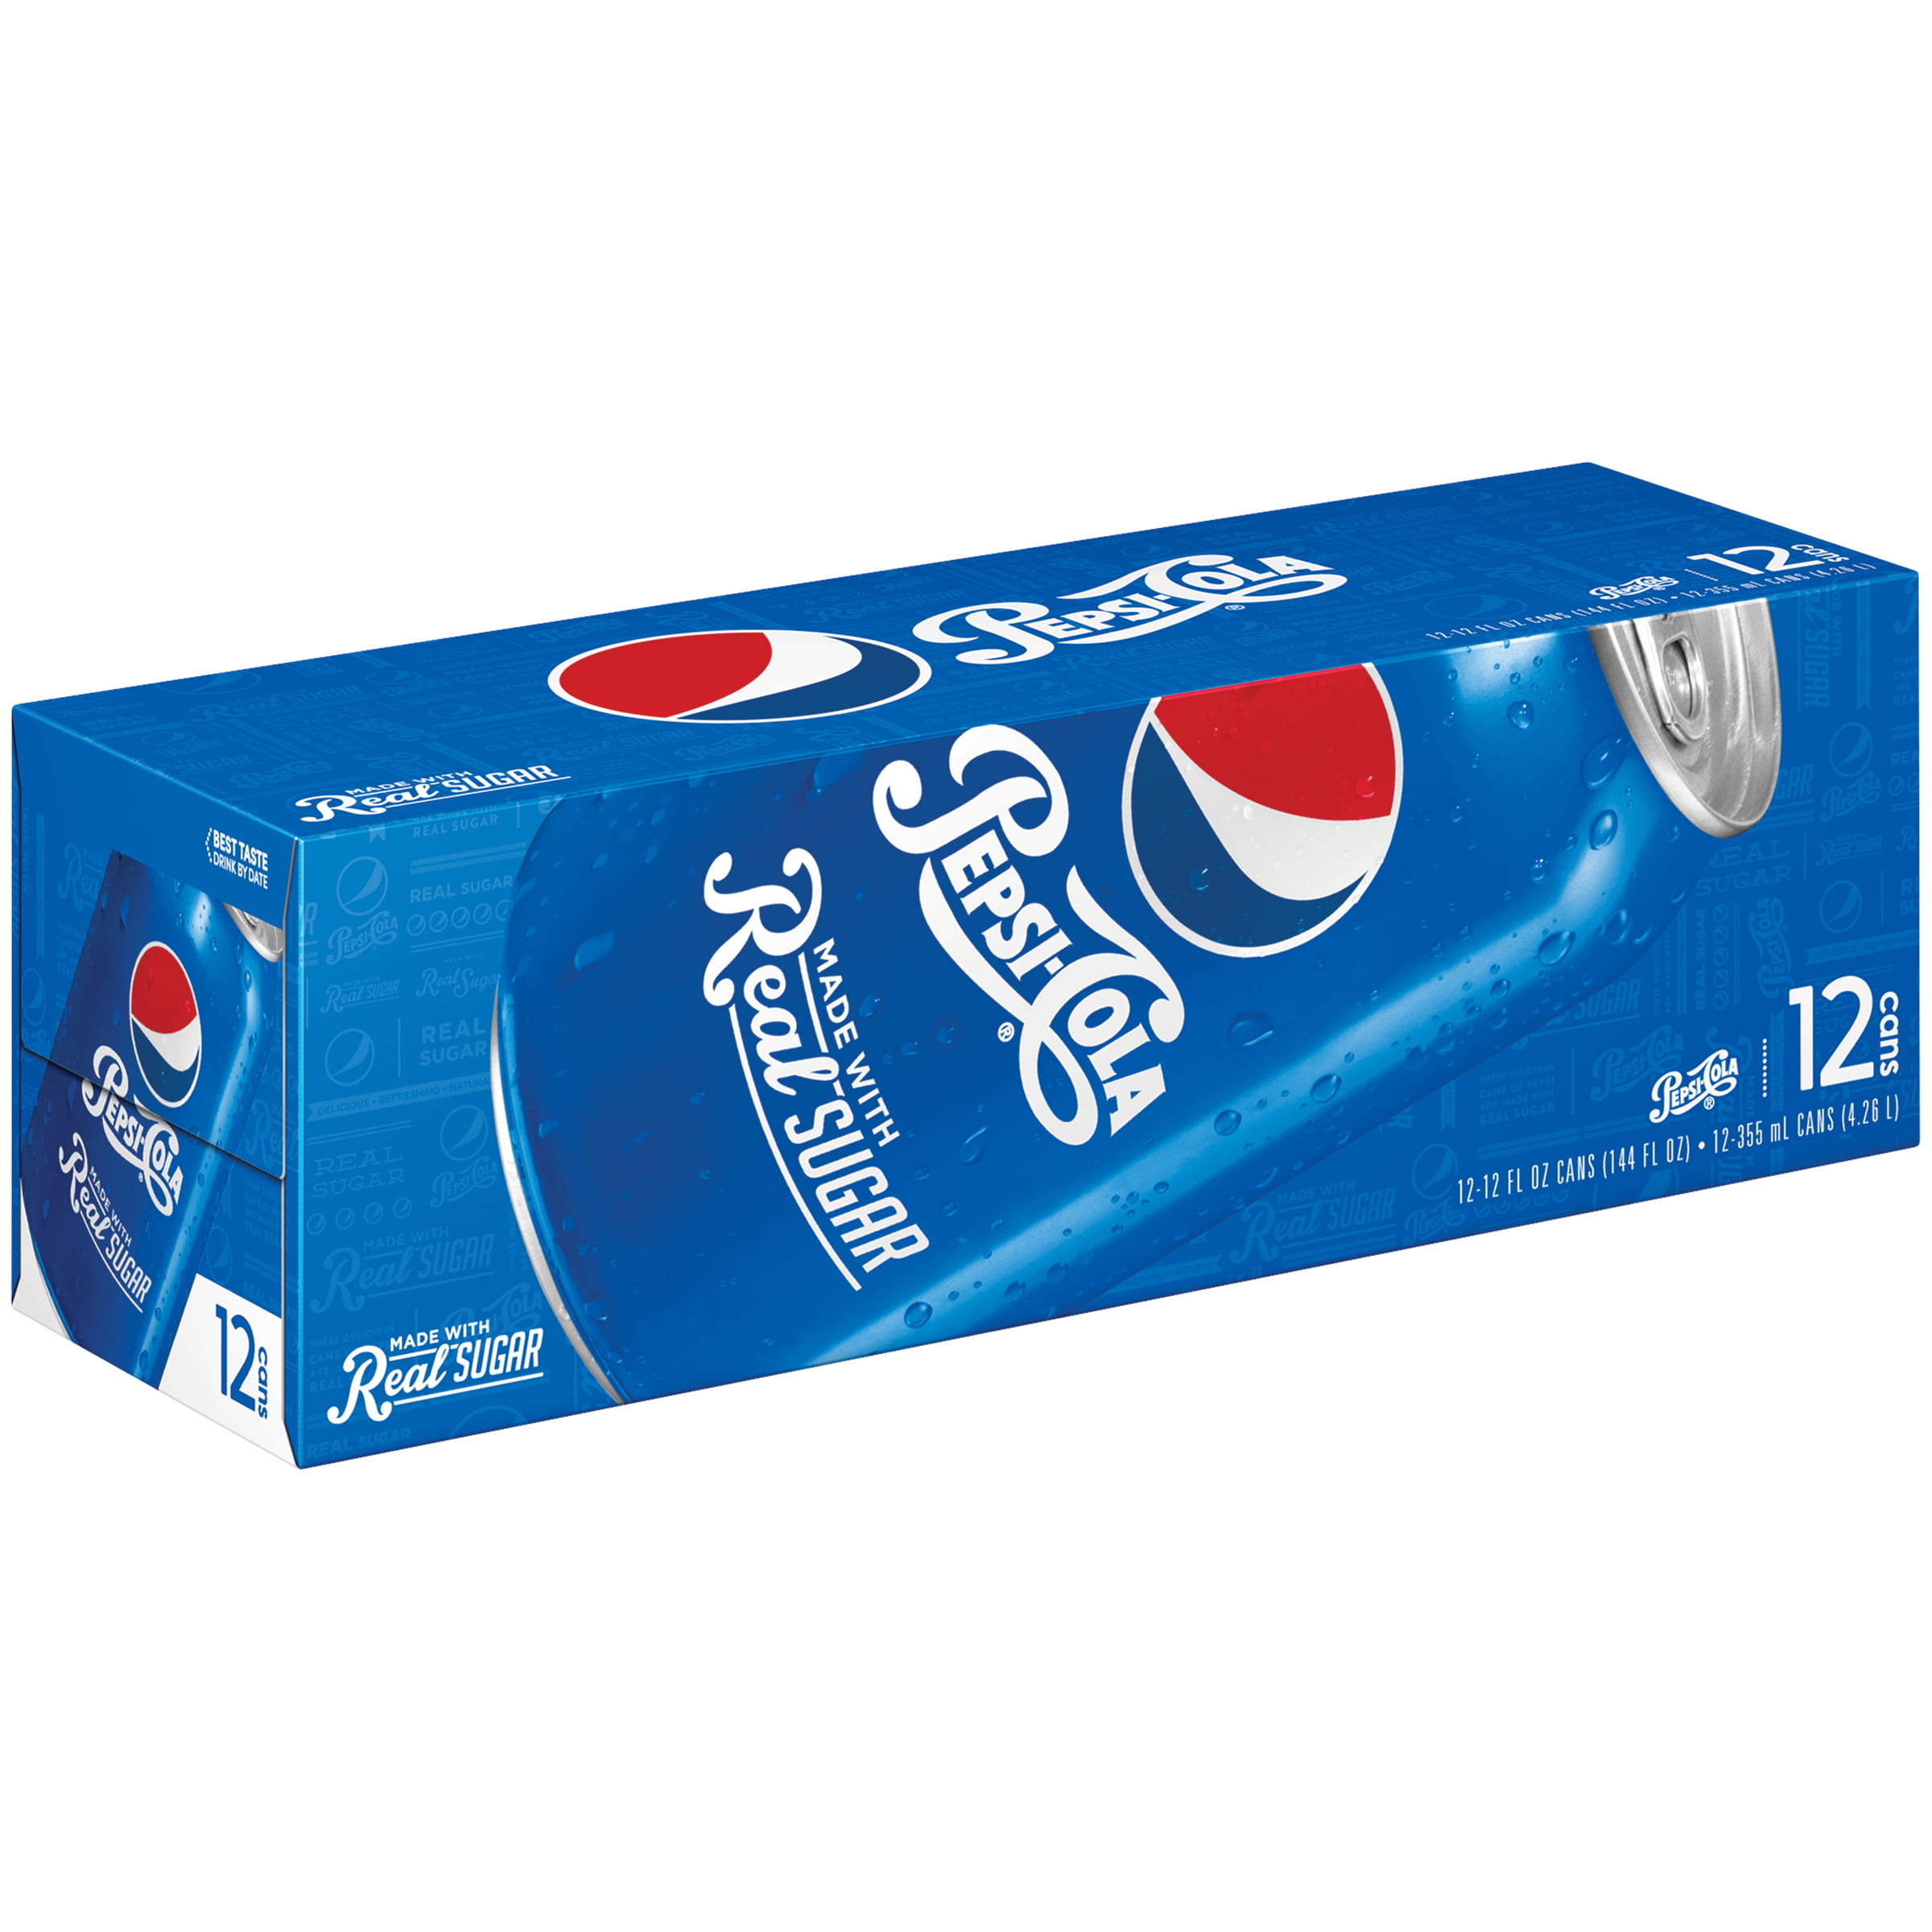 Pepsi Made With Real Sugar 12 Fl Oz Cans 12 Count Walmart